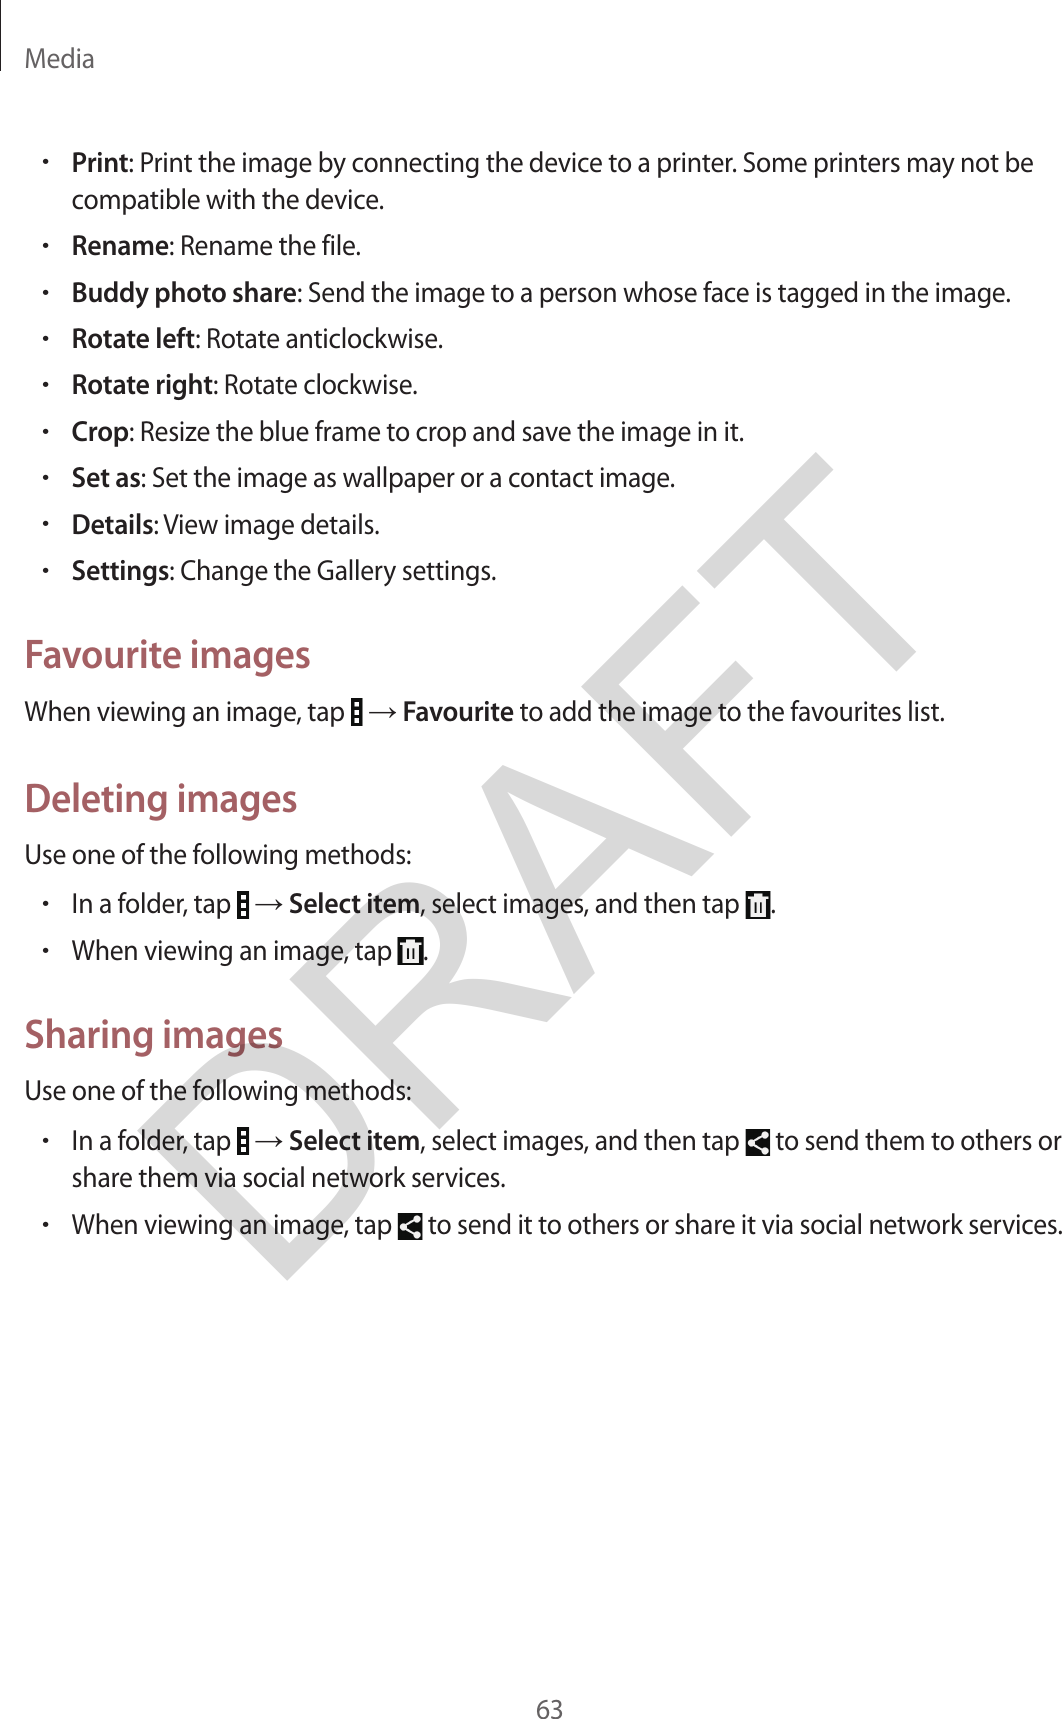 Media63•Print: Print the image by connecting the device to a printer. Some printers may not becompatible with the device.•Rename: Rename the file.•Buddy photo share: Send the image to a person whose face is tagged in the image.•Rotate left: Rotate anticlockwise.•Rotate right: Rotate clockwise.•Crop: Resize the blue frame to crop and save the image in it.•Set as: Set the image as wallpaper or a contact image.•Details: View image details.•Settings: Change the Gallery settings.Favourite imagesWhen viewing an image, tap   → Favourite to add the image to the favourites list.Deleting imagesUse one of the following methods:•In a folder, tap   → Select item, select images, and then tap  .•When viewing an image, tap  .Sharing imagesUse one of the following methods:•In a folder, tap   → Select item, select images, and then tap   to send them to others orshare them via social network services.•When viewing an image, tap   to send it to others or share it via social network services.DRAFT